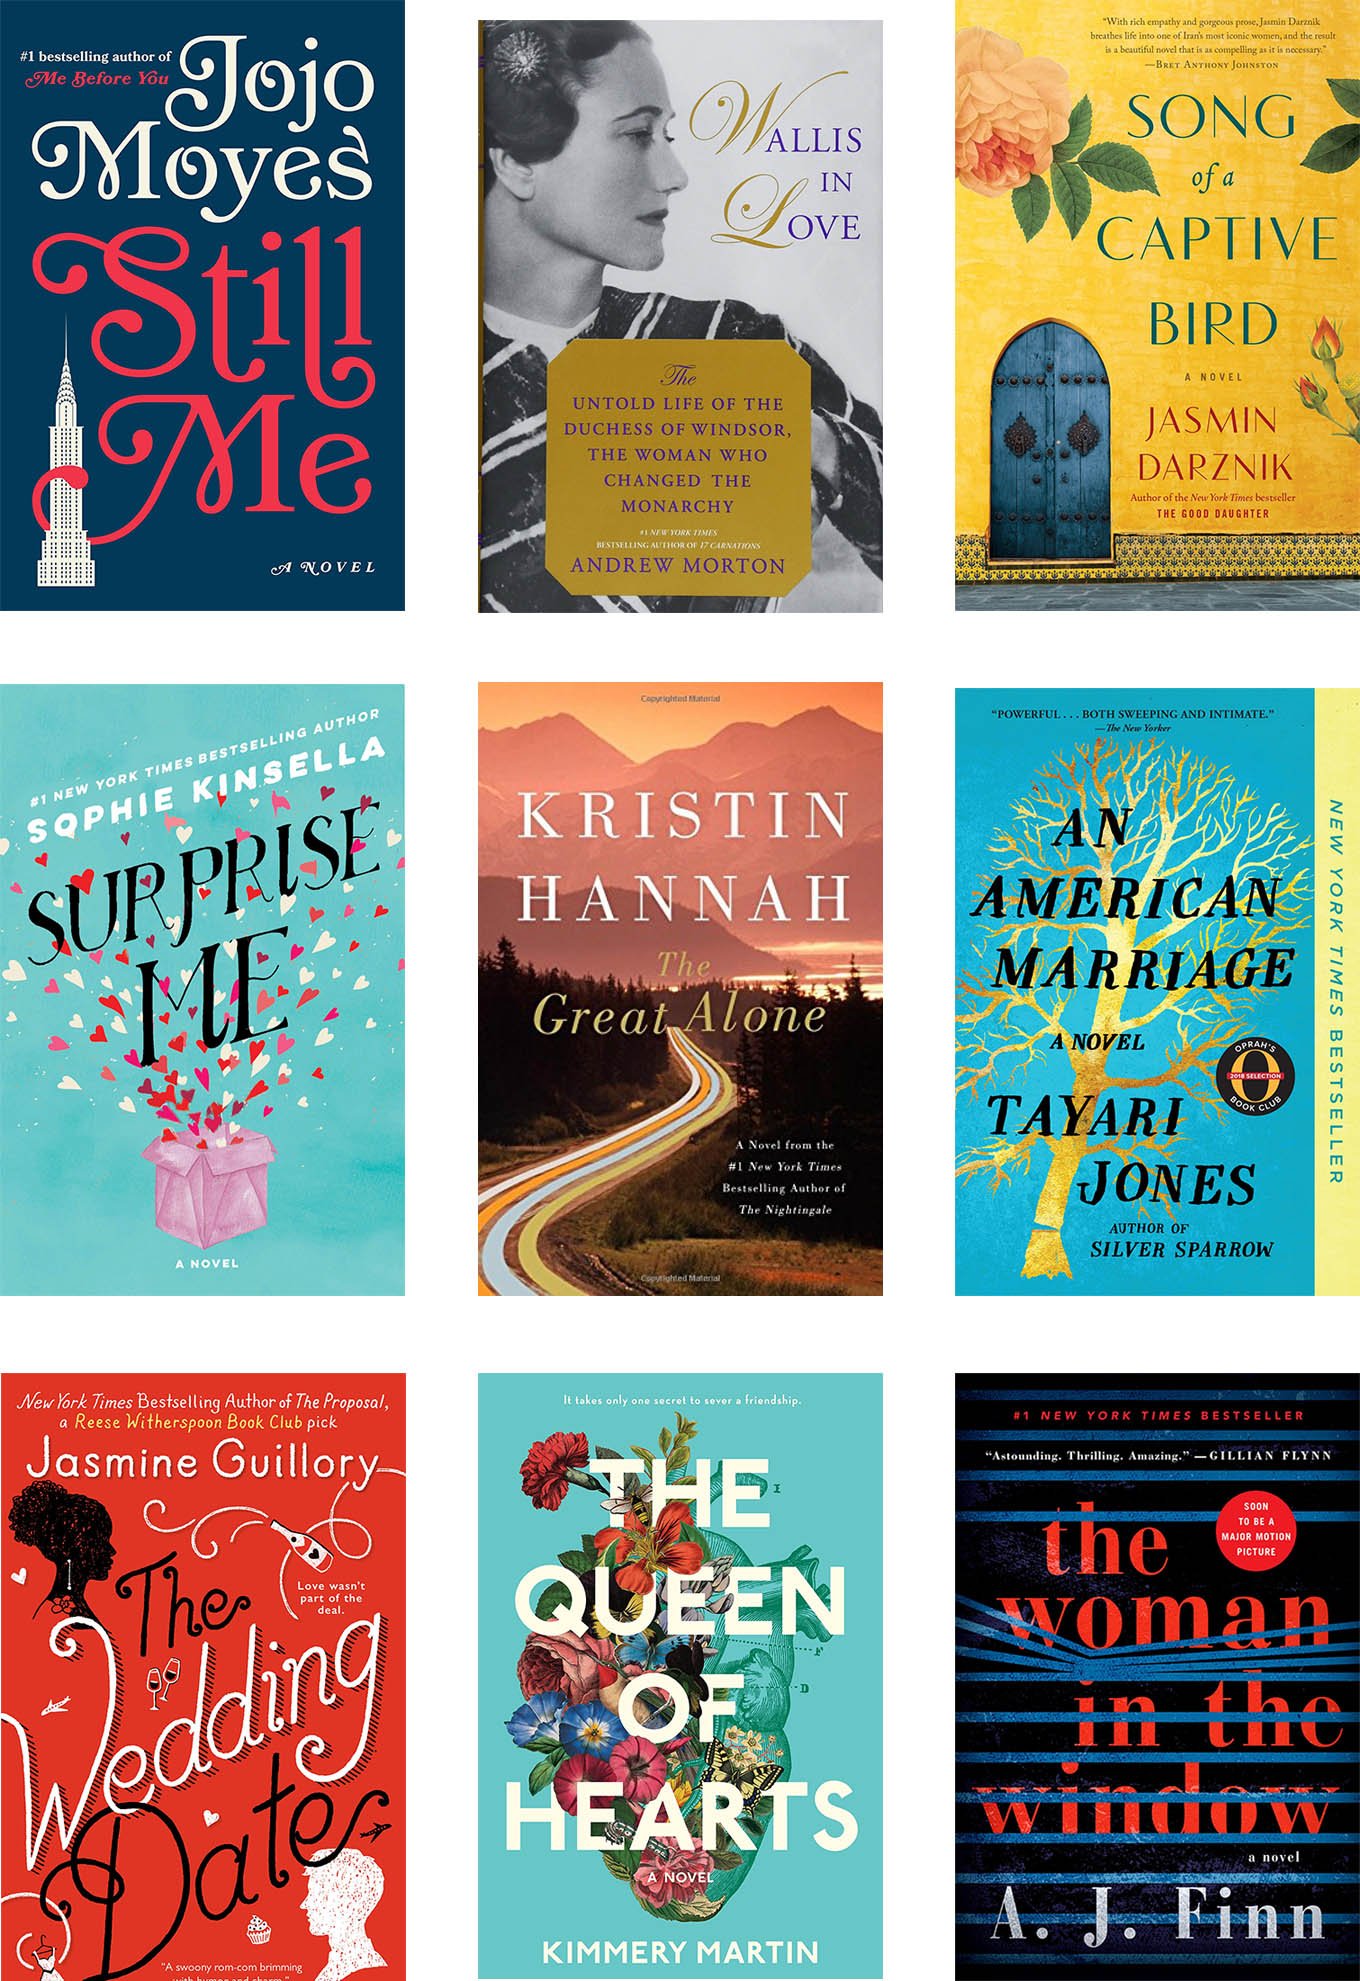 Ridgely Brode shares 9 new books for 2018 that she has on her reading list and is going to start with Still Me by Jojo Moyes. What's on your List?